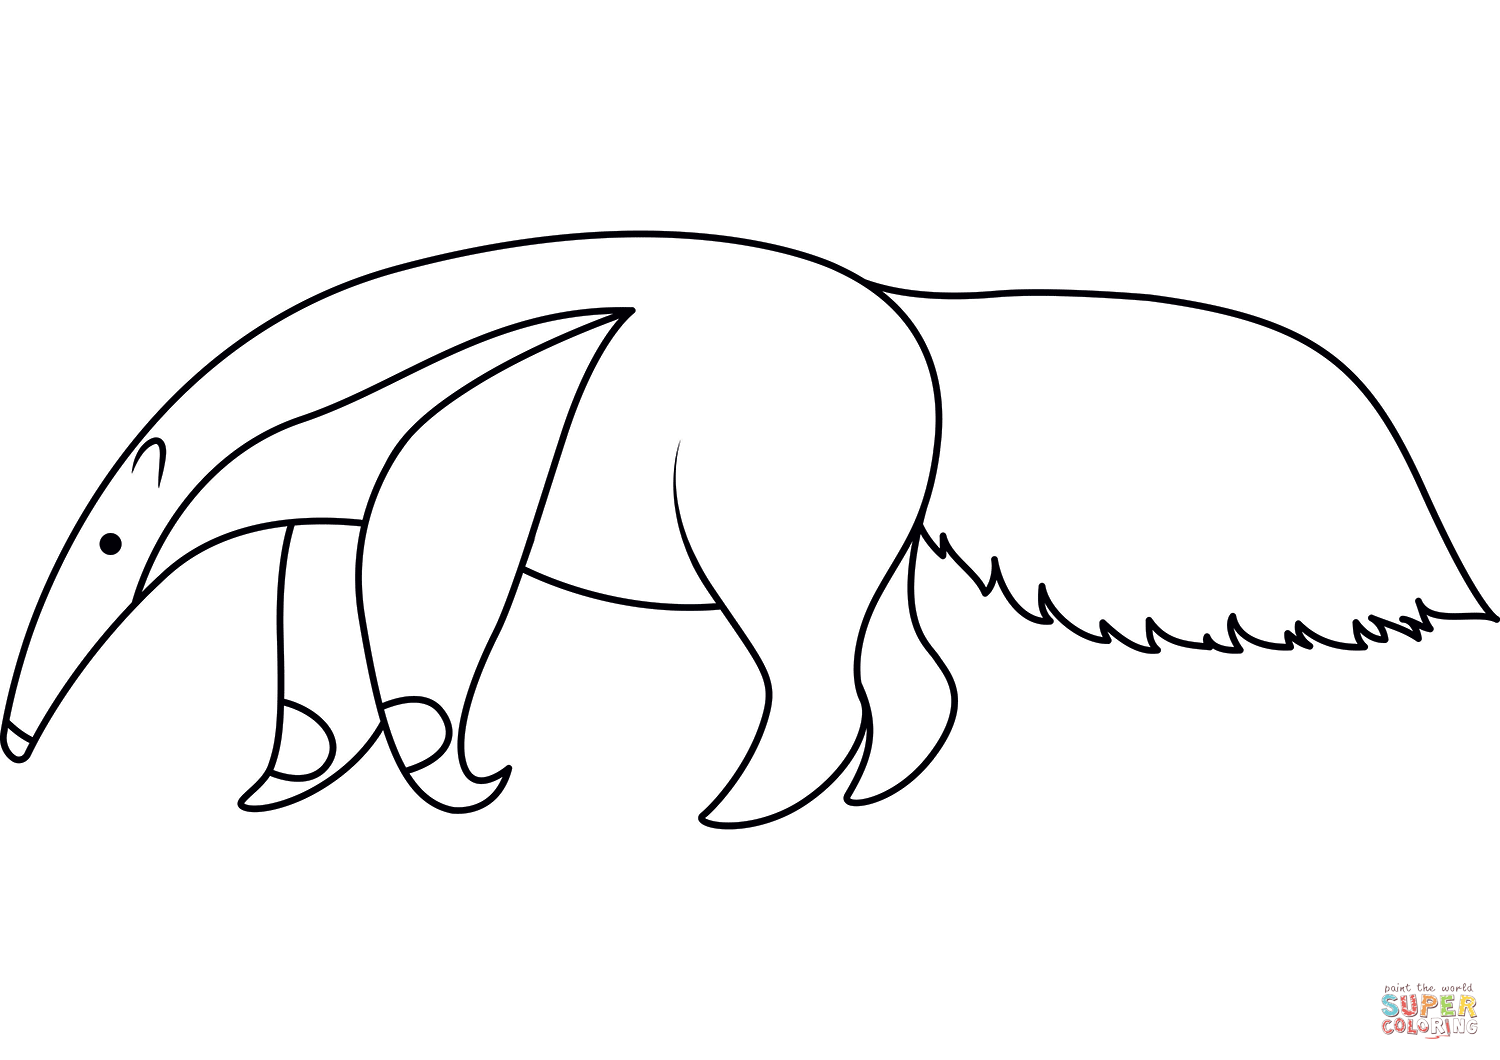 Anteater coloring page free printable coloring pages